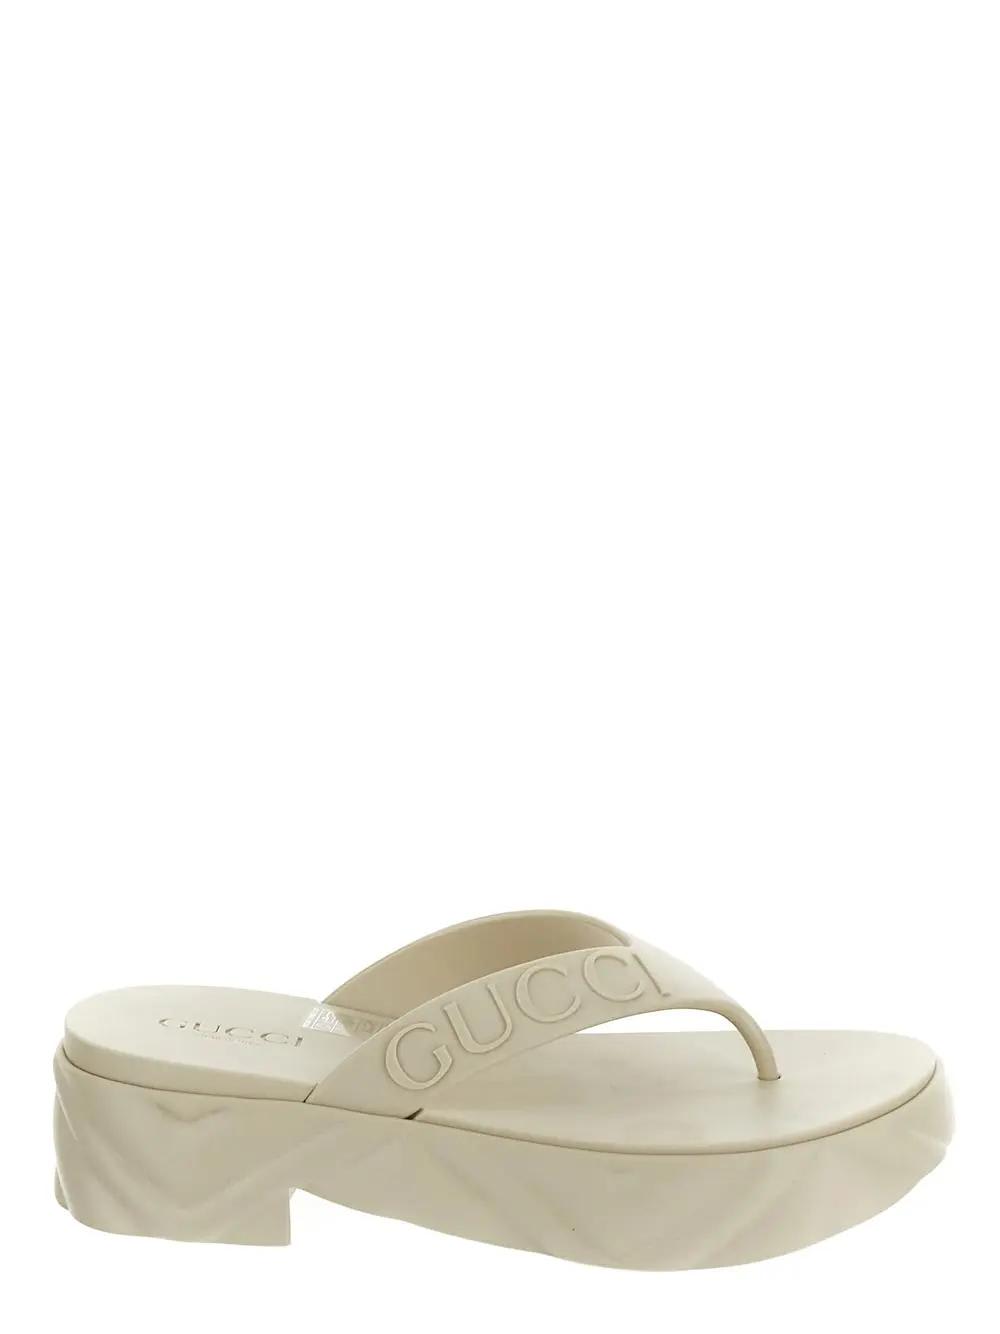 Gucci Thong Platform Sandals In White